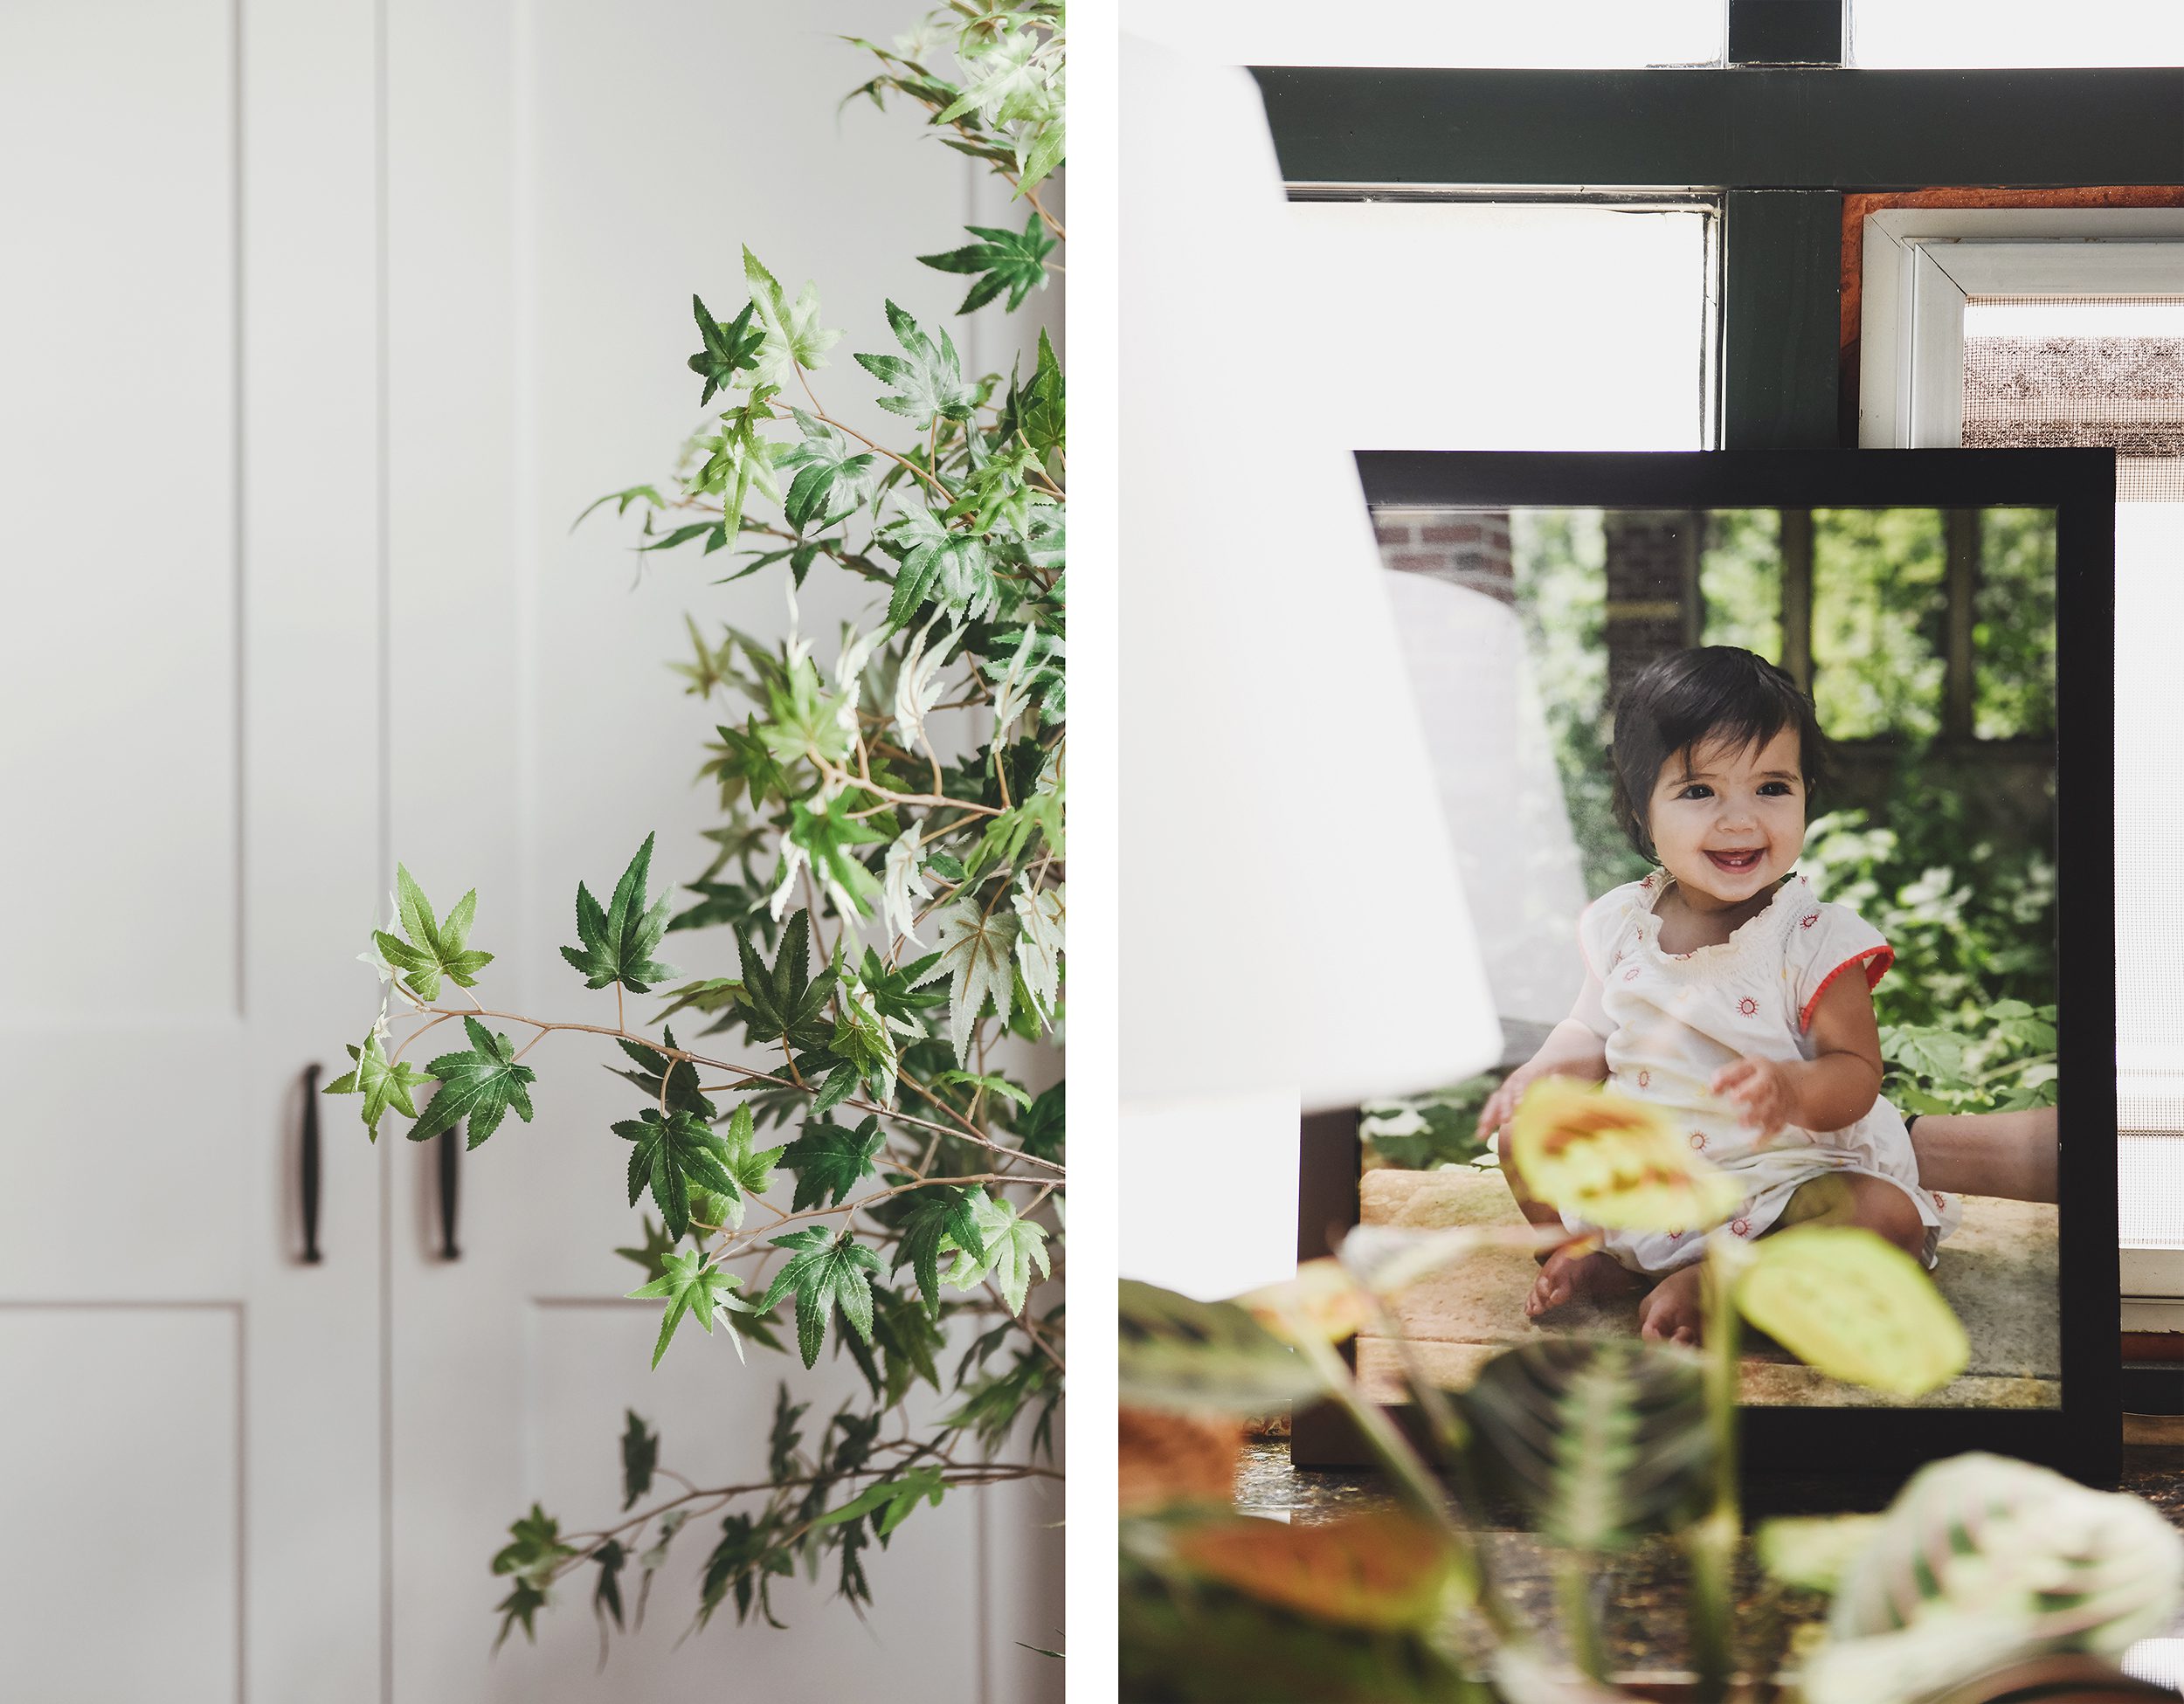 The faux tree and family photos give the space a lively, personal touch // via Yellow Brick Home